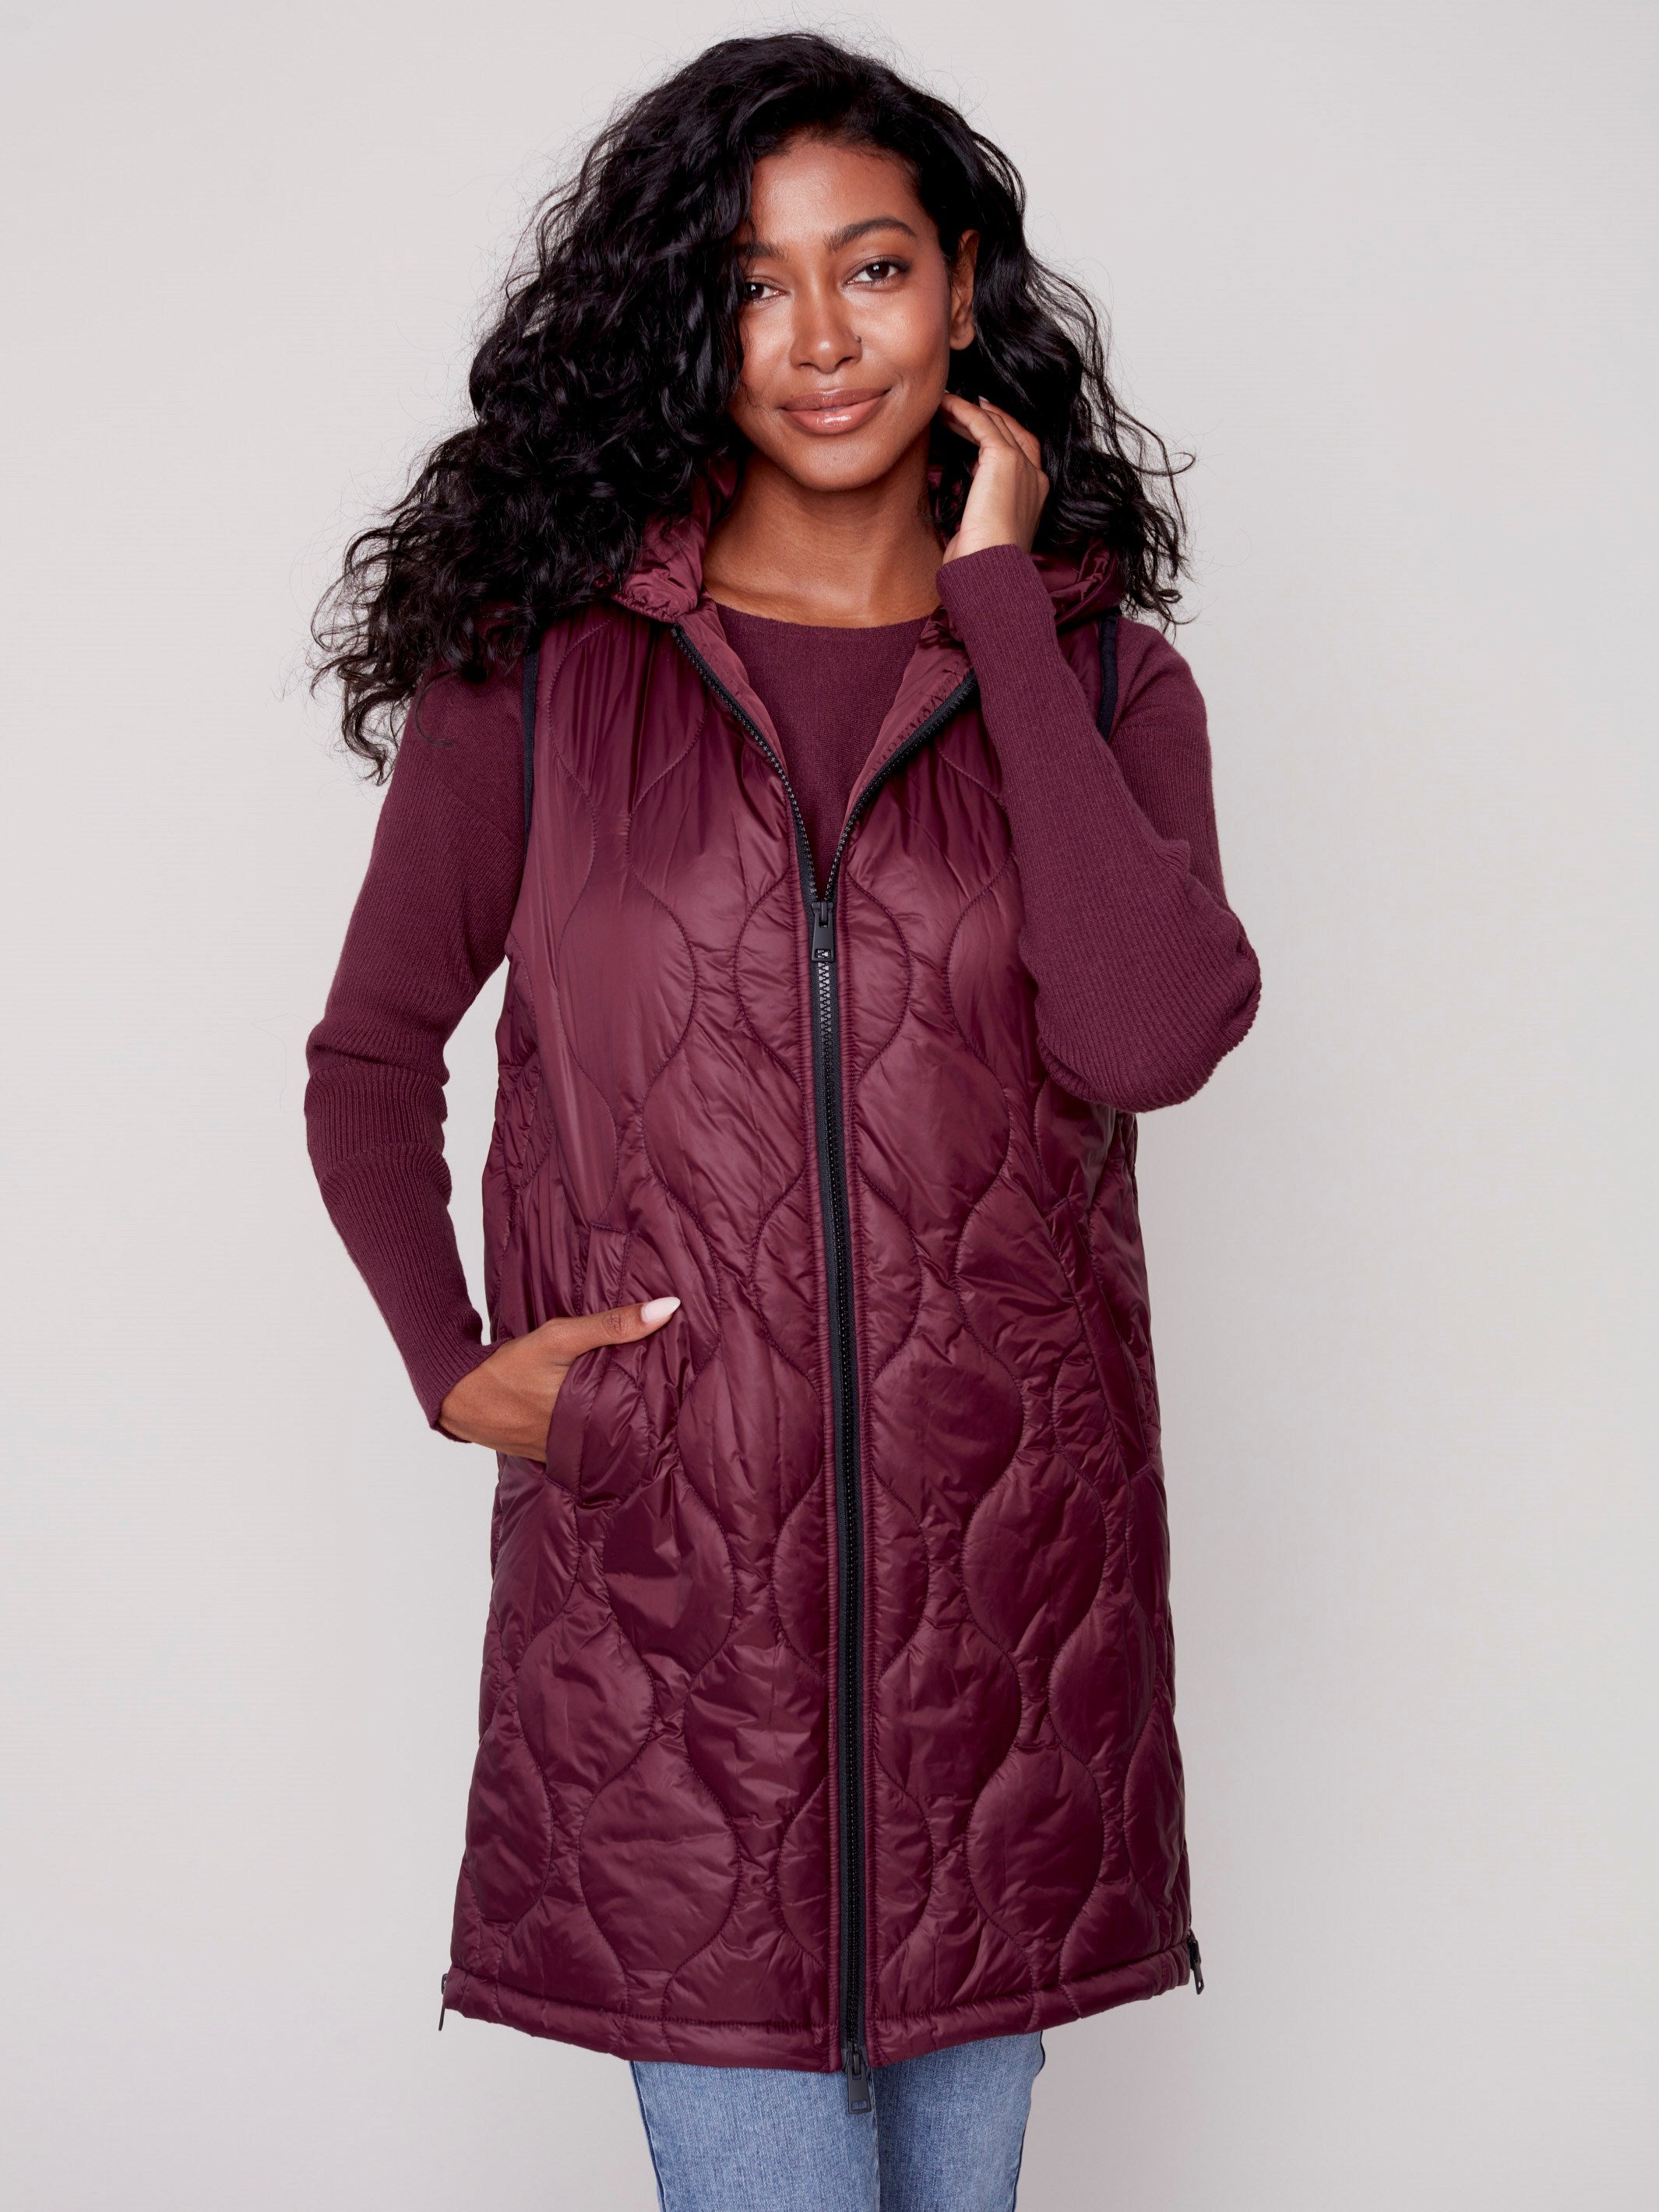 Long Quilted Puffer Vest with Hood - Port